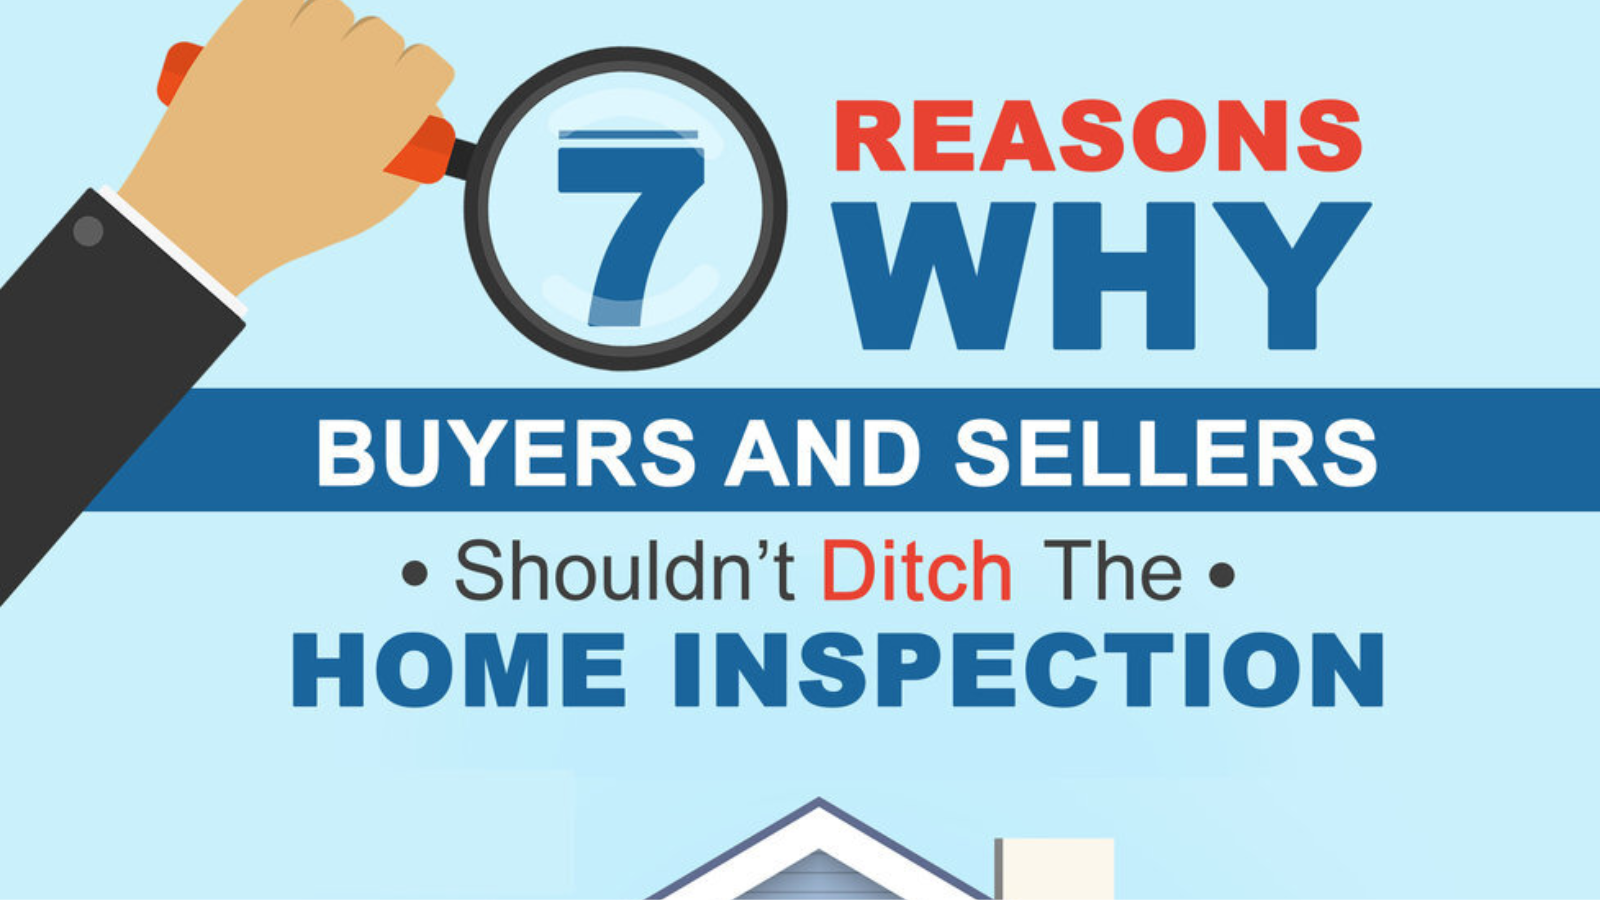 7 Reasons Why Buyers and Sellers Shouldn't Ditch The Home Inspection